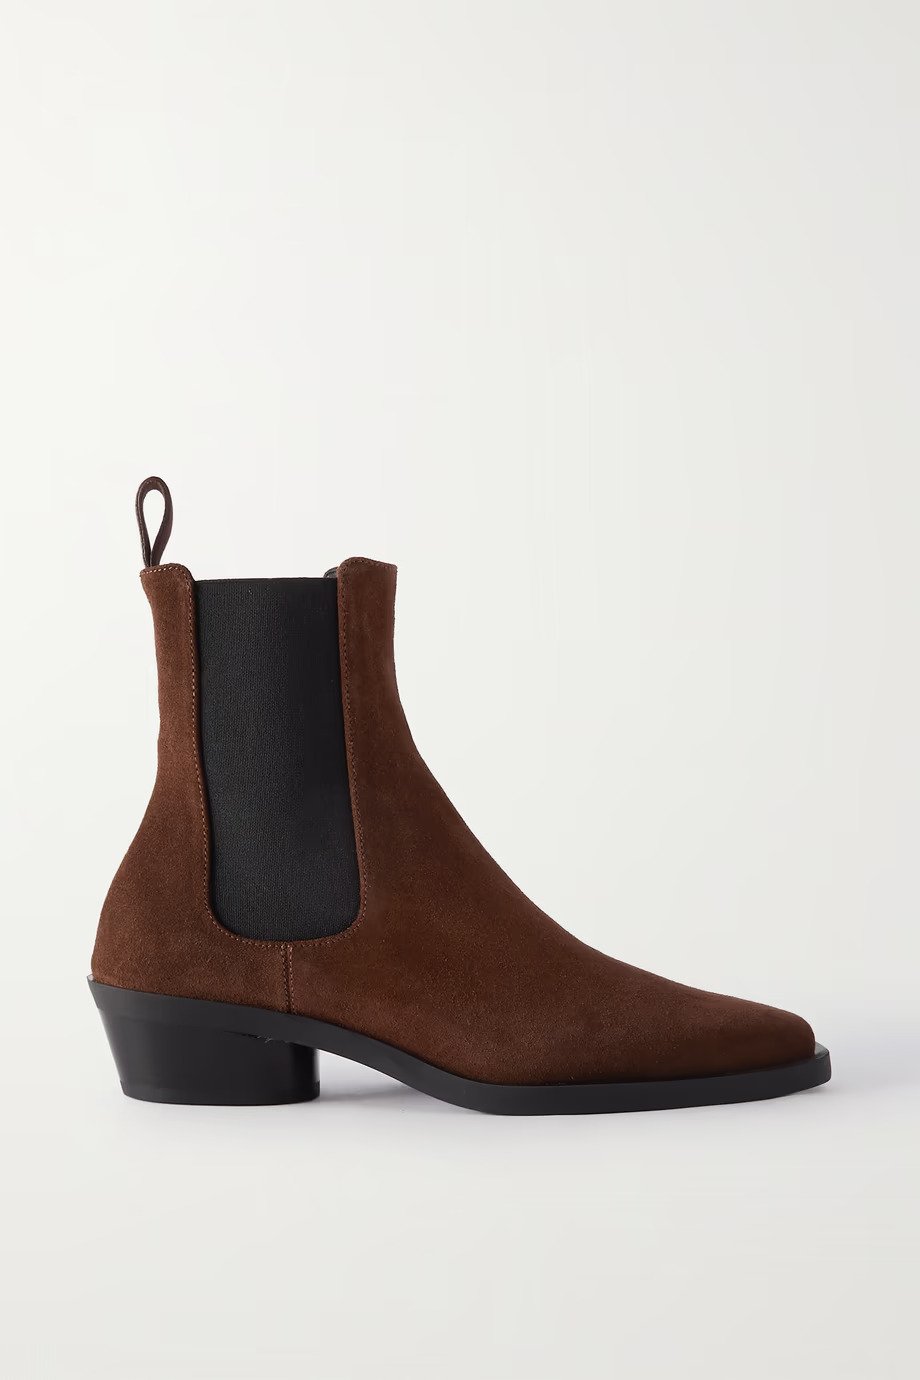 How to Wear Chelsea Boots With Everything You Already Own | Who What ...